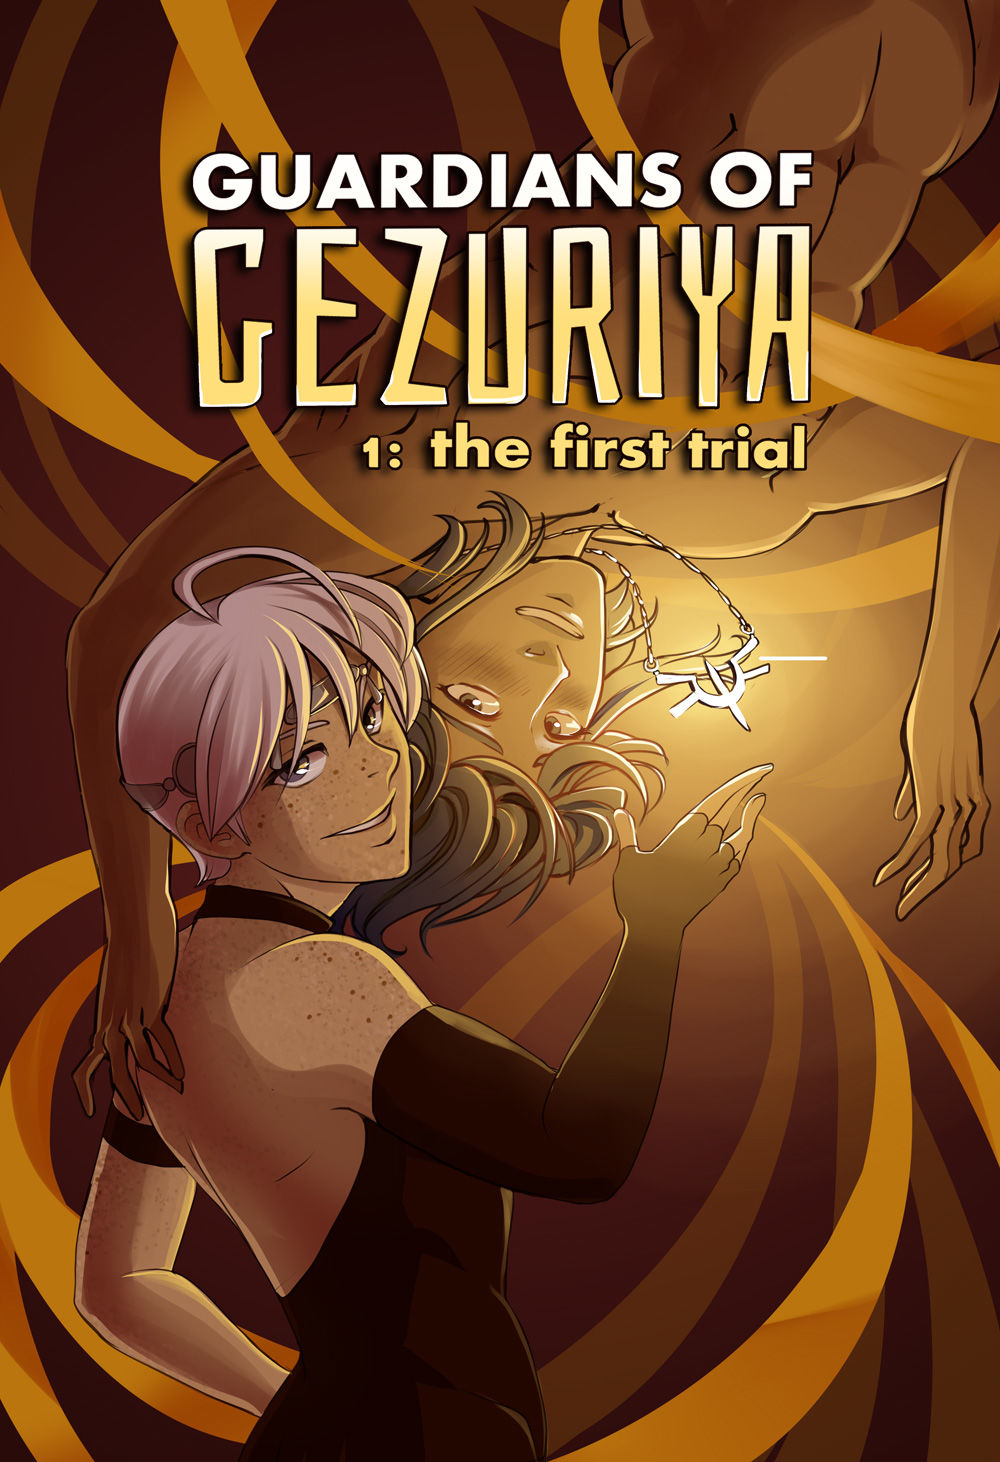 Guardians of Gezuriya Chapter 1 page 1